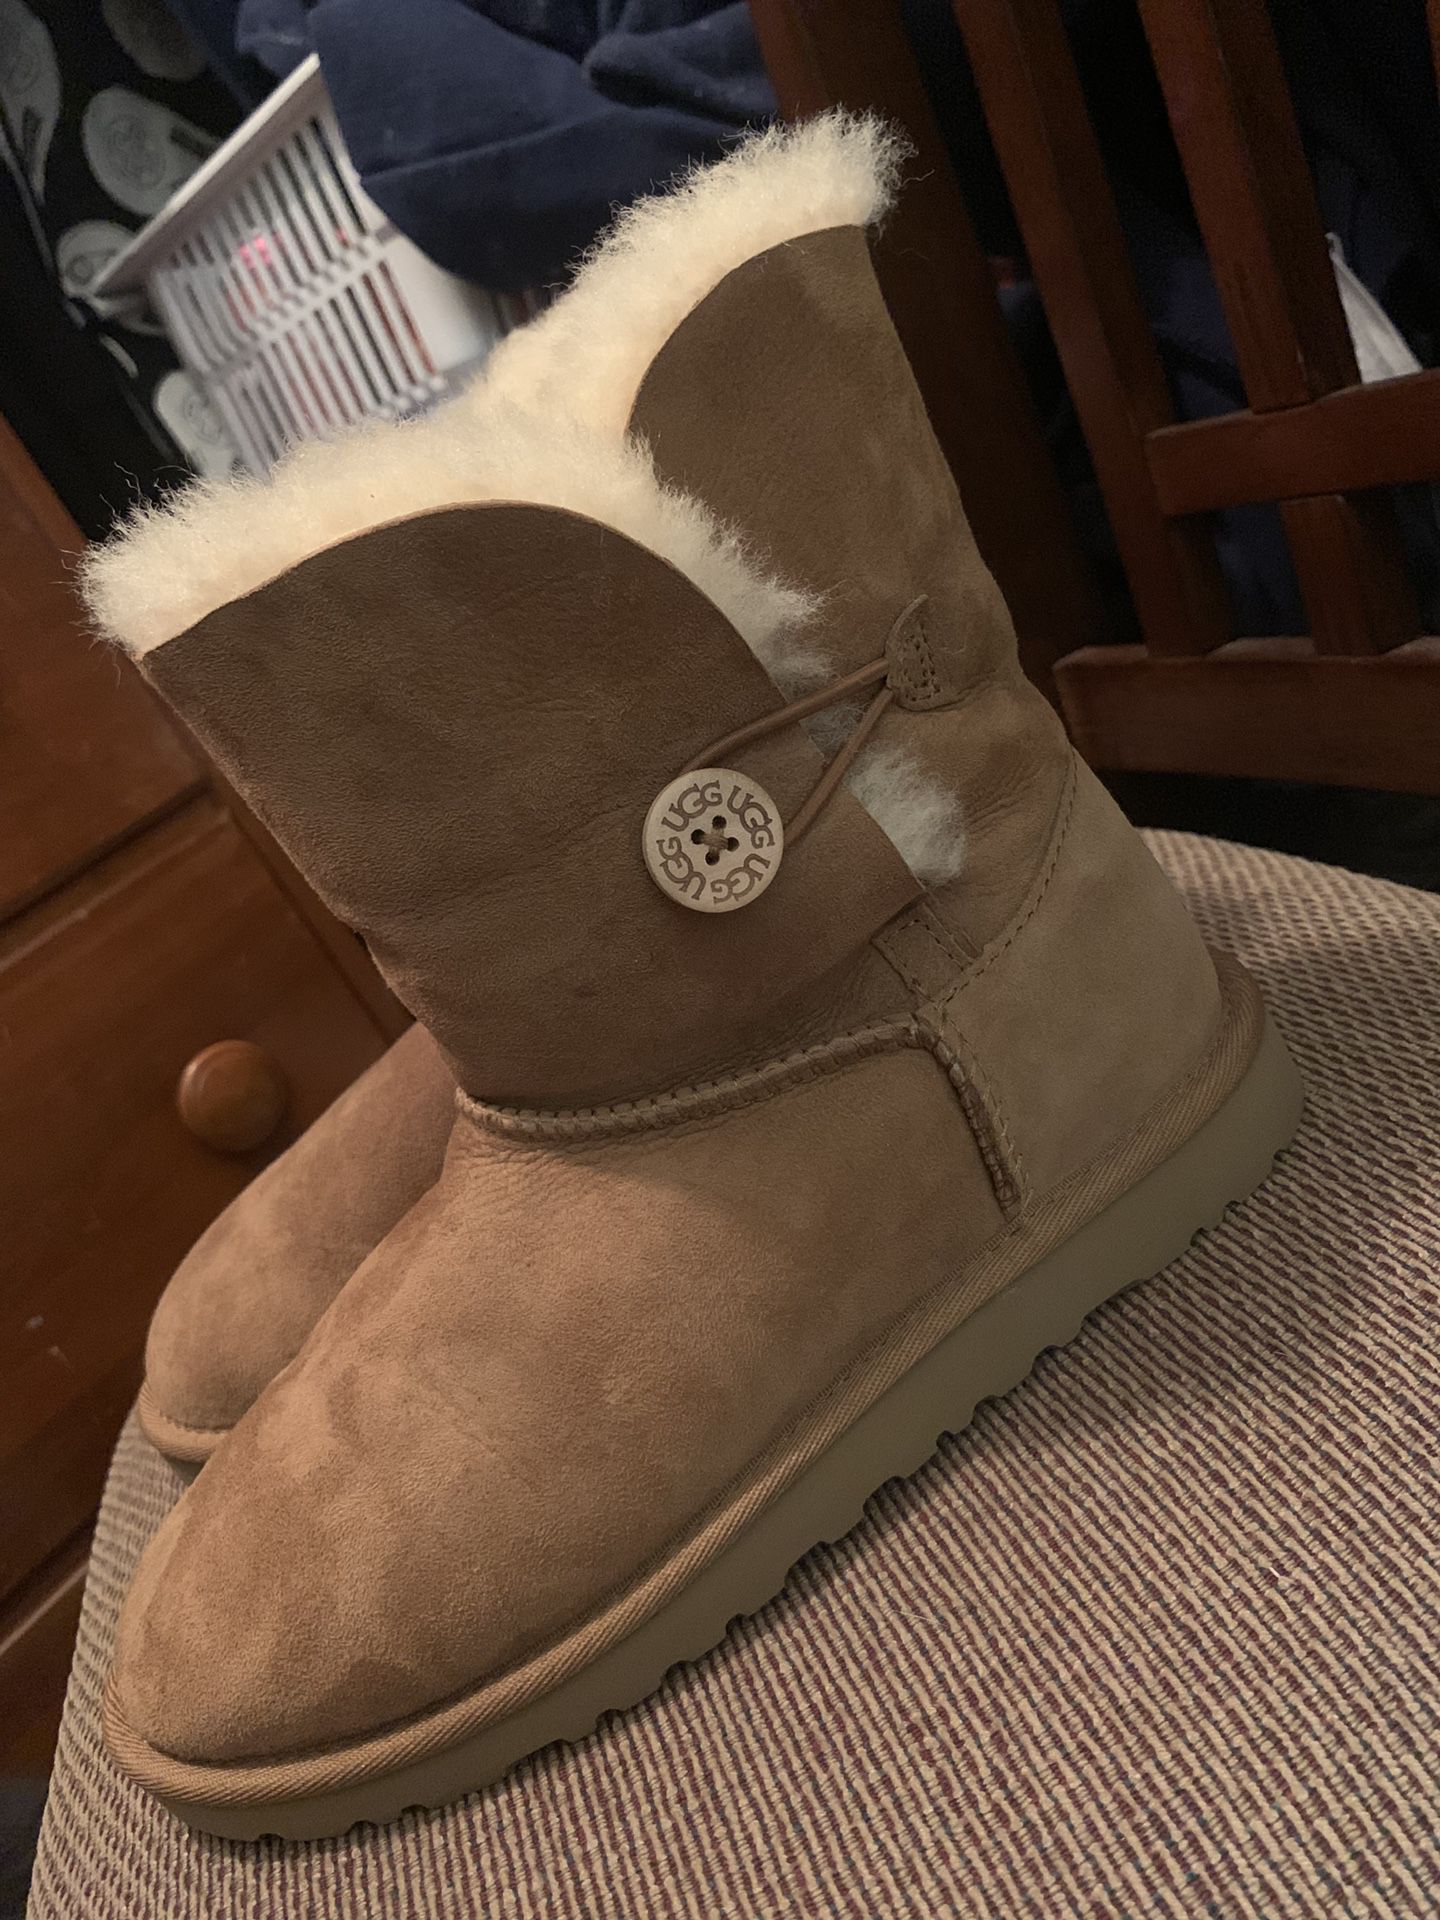 UGG- Women’s Bailey Button Uggs, size 6.